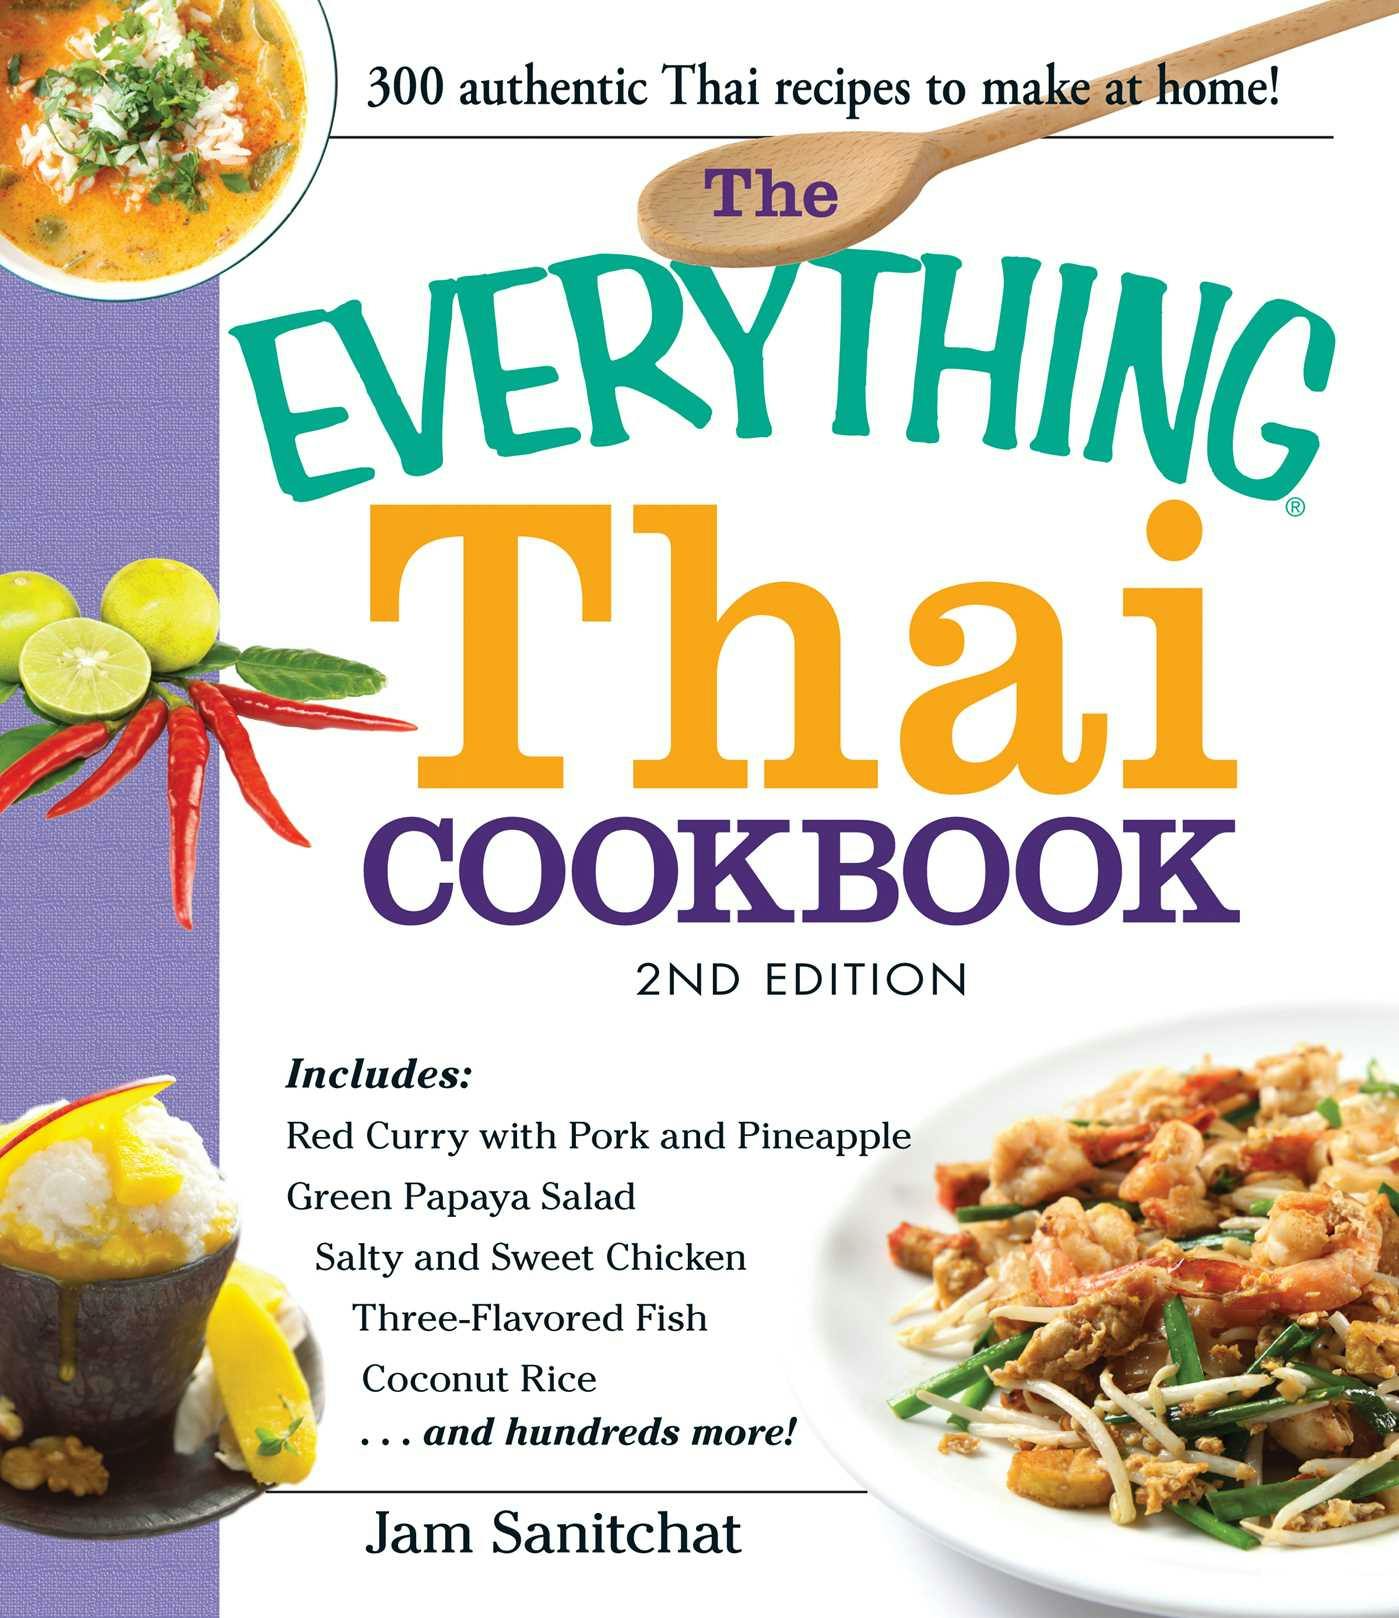 The Everything Thai Cookbook: Includes Red Curry with Pork and Pineapple, Green Papaya Salad, Salty and Sweet Chicken, Three-Flavored Fish, Coconut Rice, and hundreds more! - Jam Sanitchat